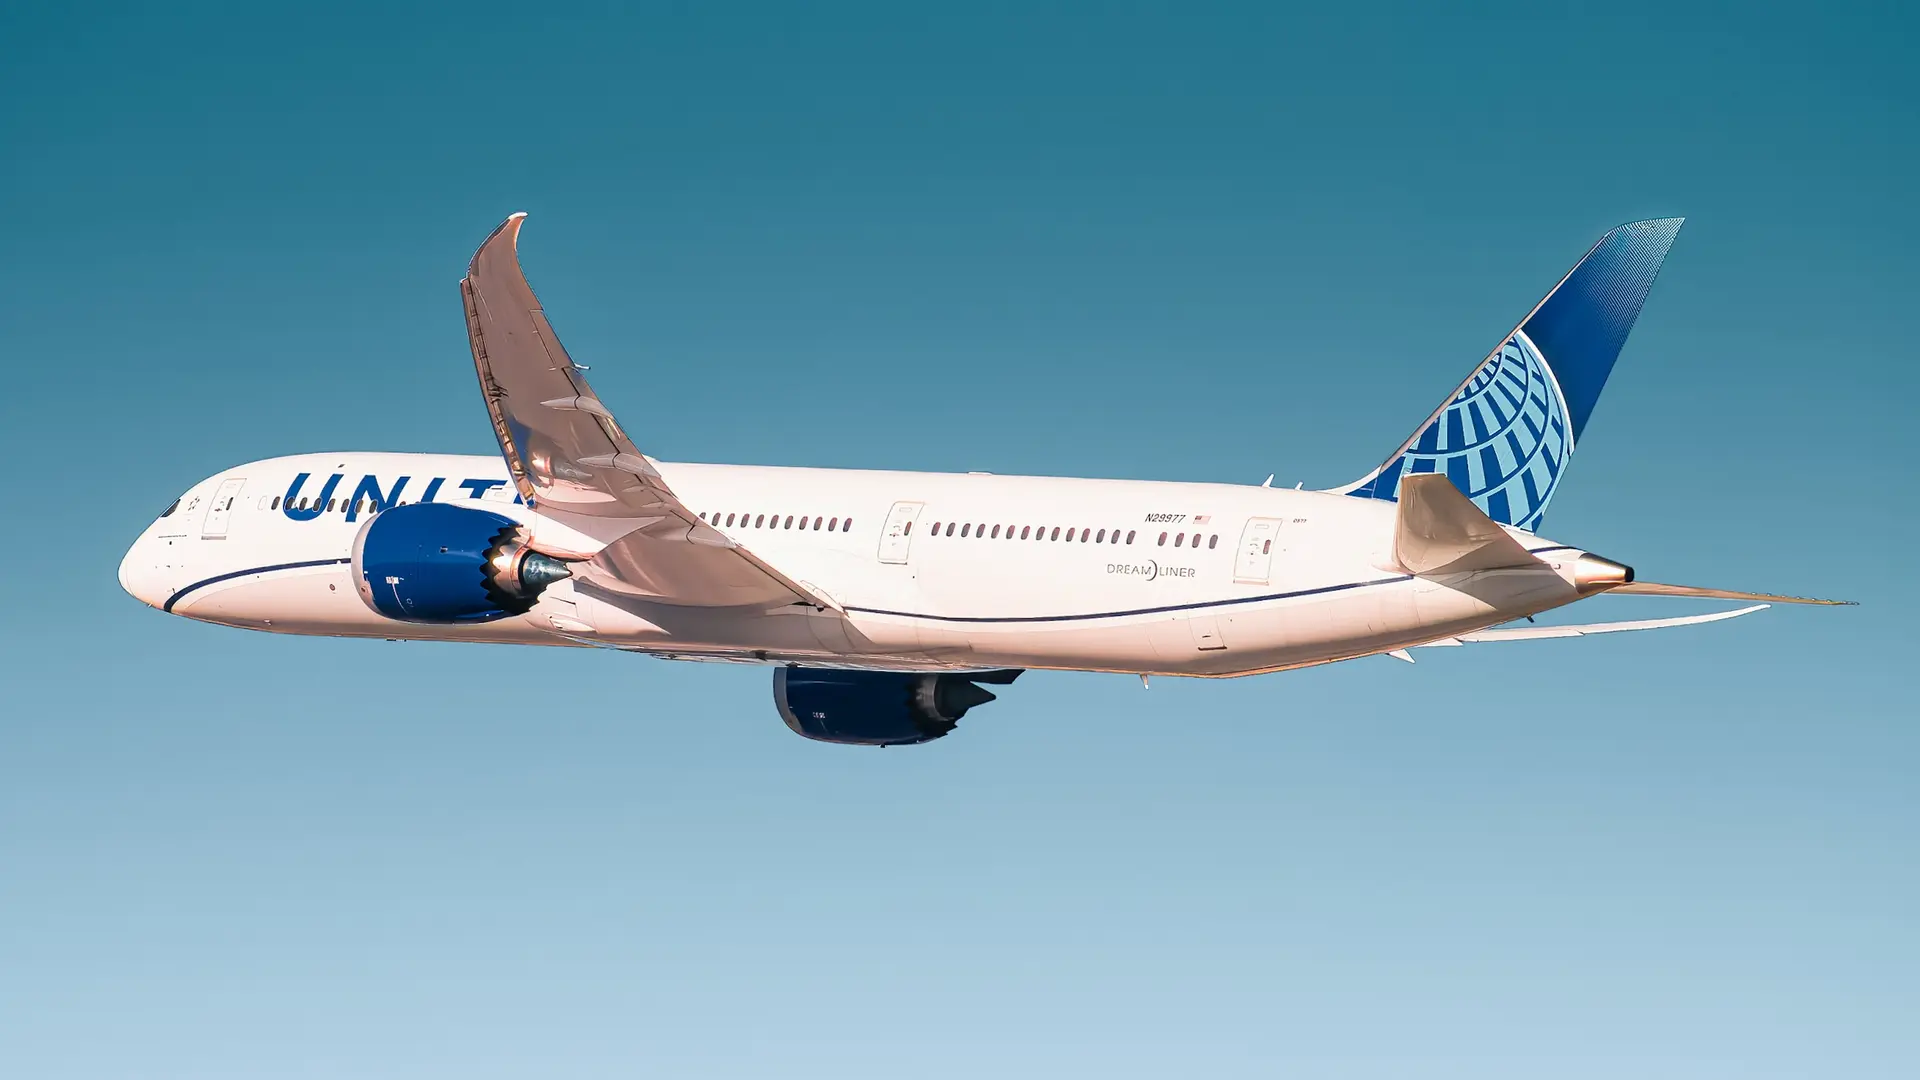 Airlines News - United Airlines brings back ice cream sundaes